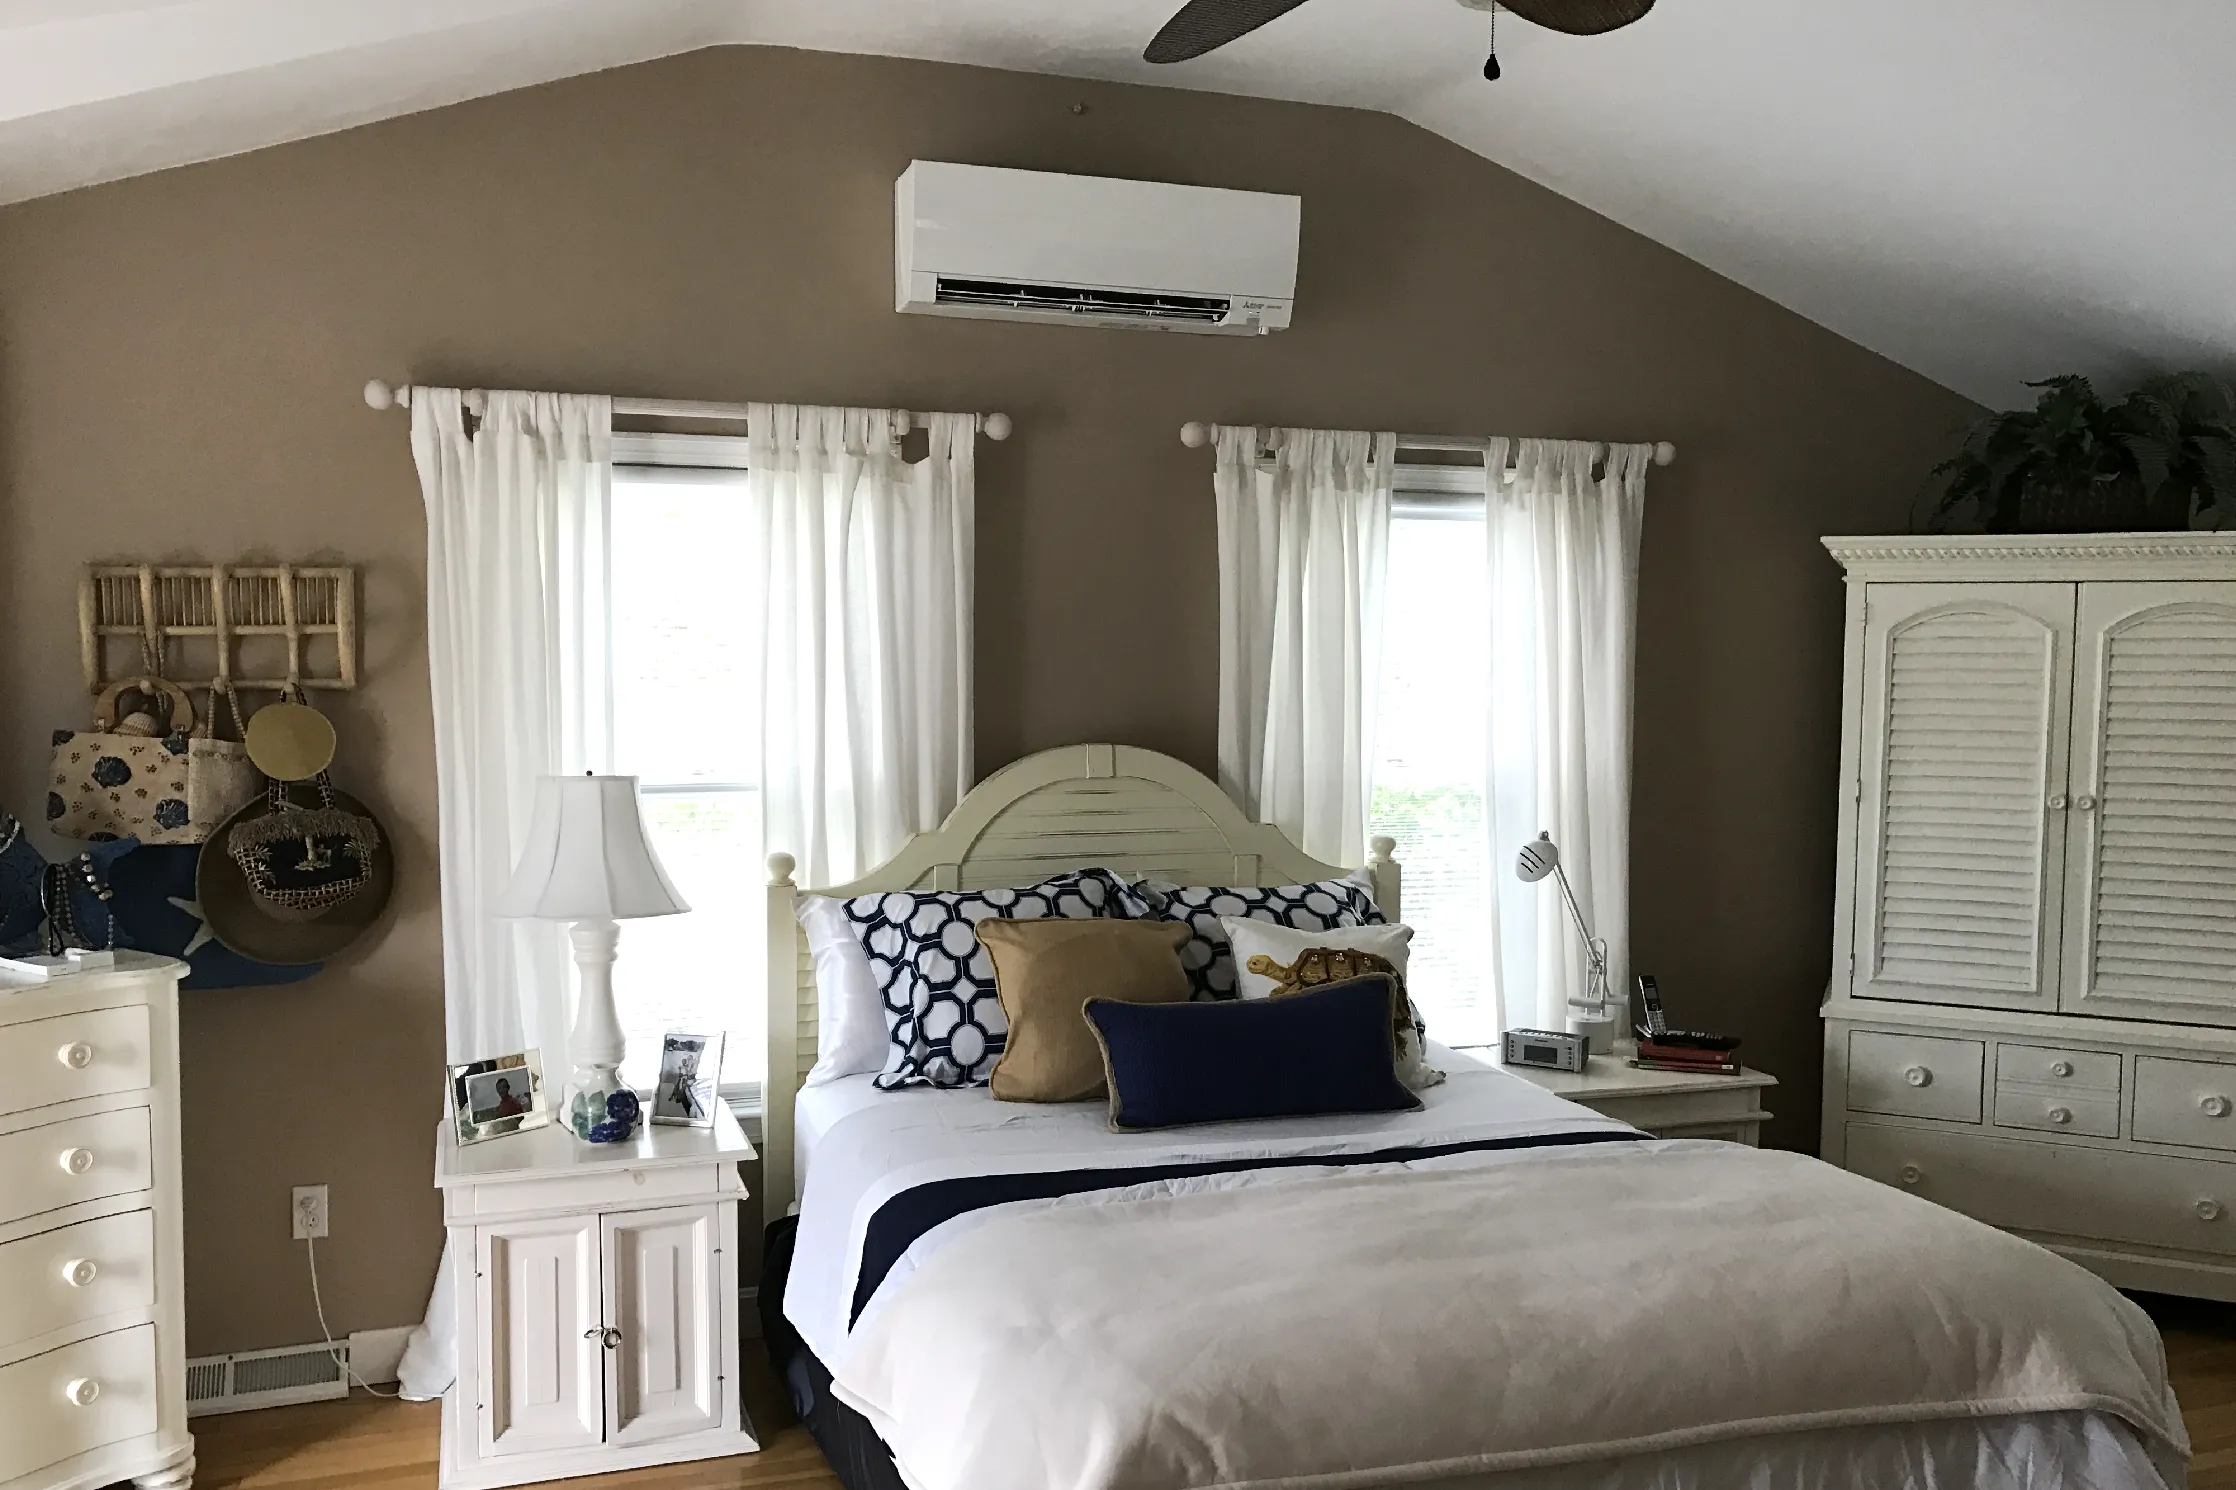 A Mitsubishi Ductless system in a bedroom